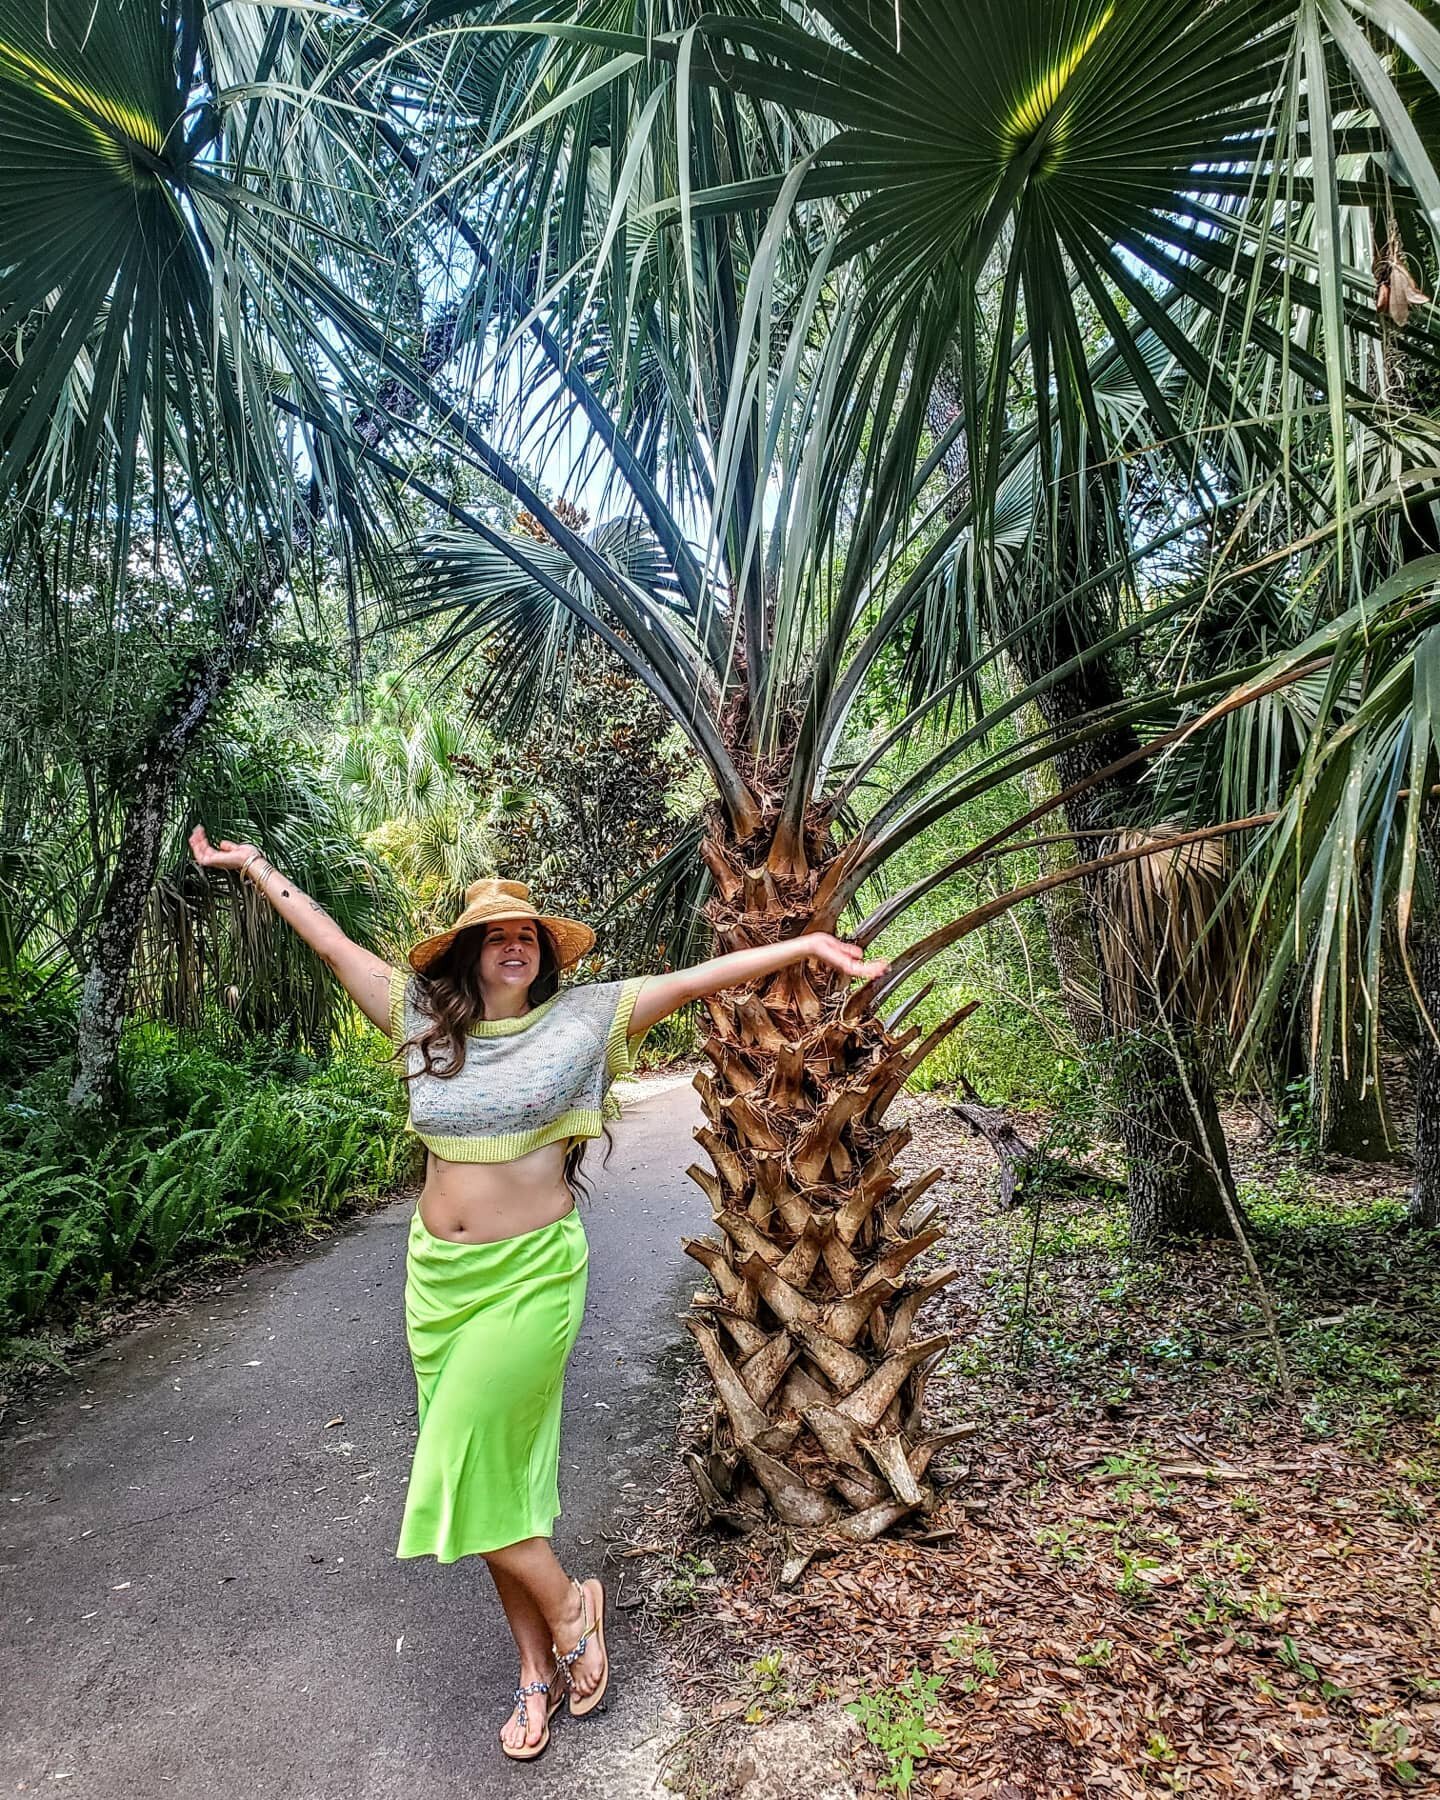 🌴🍾 Come see the not-so-elusive Knitting Tipsy in her natural habitat 🍾🌴
.
*Post continues in Australian accent*
.
Here we can see her running carefree through the Florida heat attracting unsuspecting prey in brightly colored FOs.  The mating call